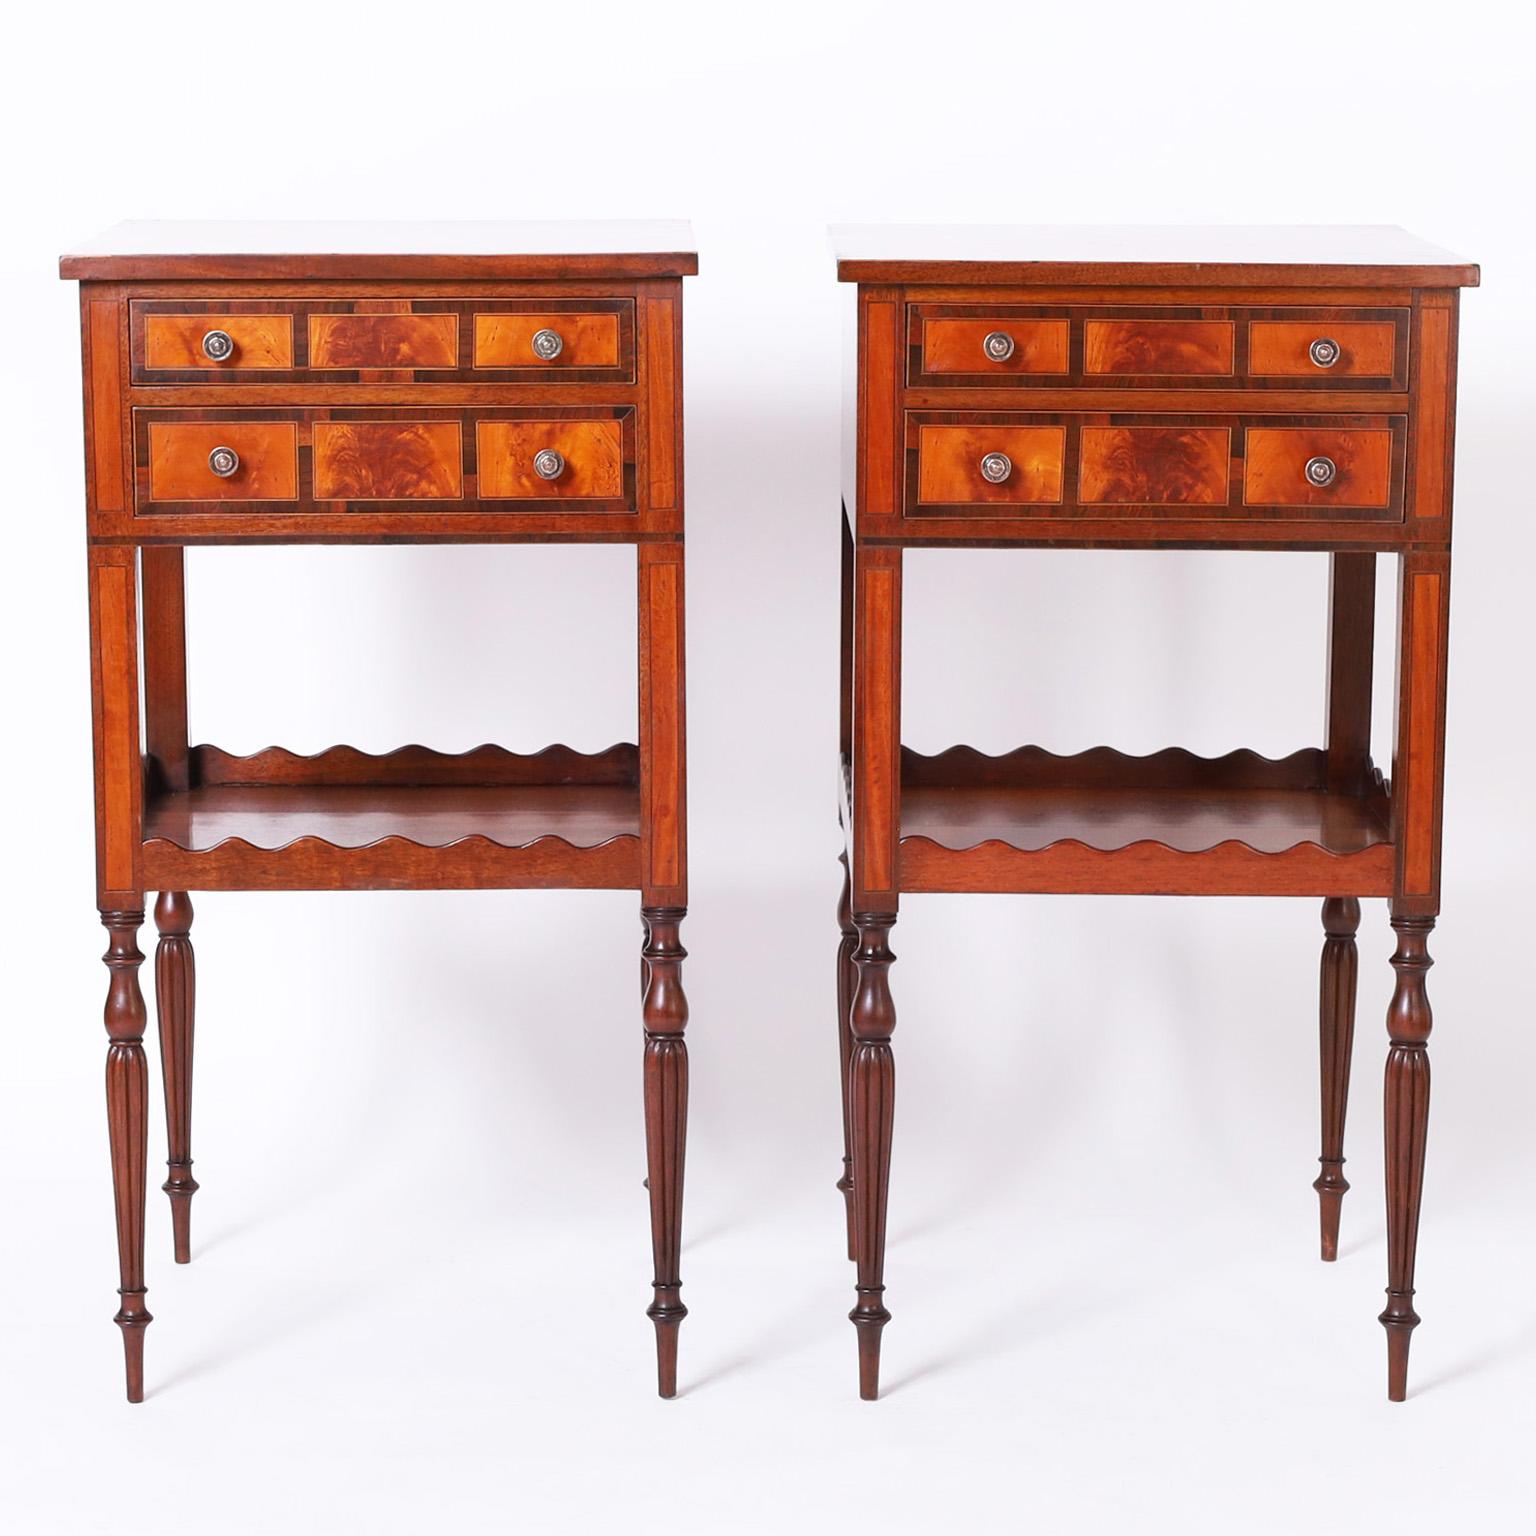 Handsome pair of antique Sheraton style English stands crafted in mahogany with a crossbanded top on a case with two drawers featuring crossbanded and burled panels and brass hardware. The lower tier has a scalloped gallery and sits on elegant